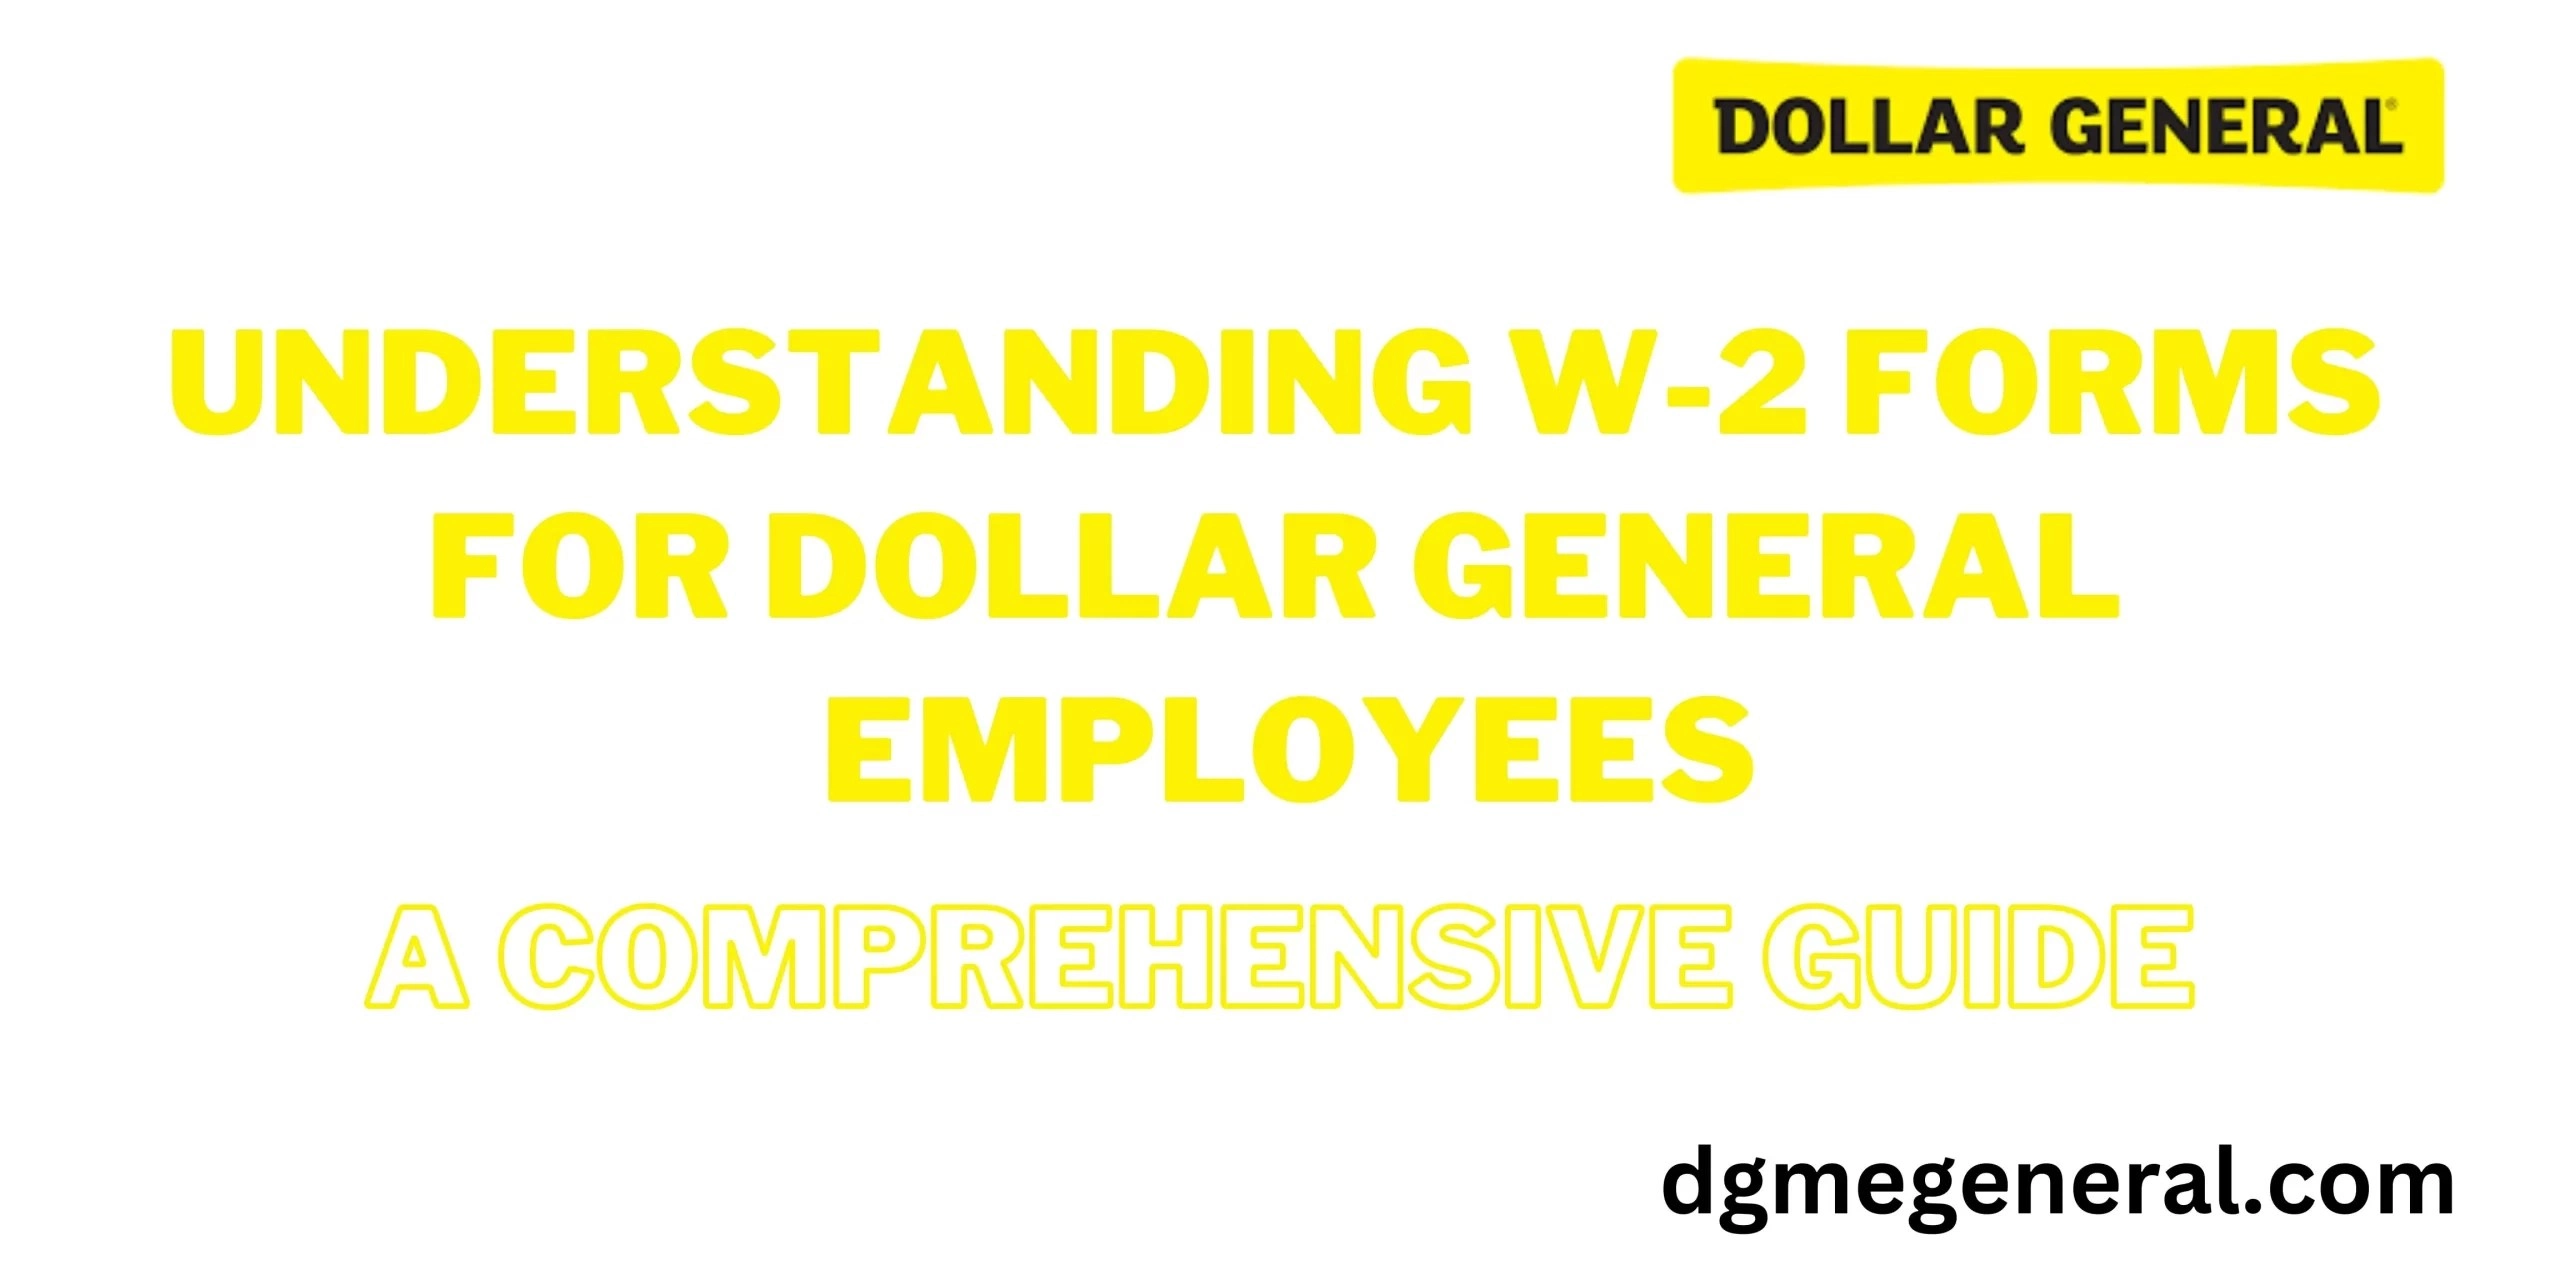 Dollar General Former Employee W2 intended for Dollar General Former Employee W2